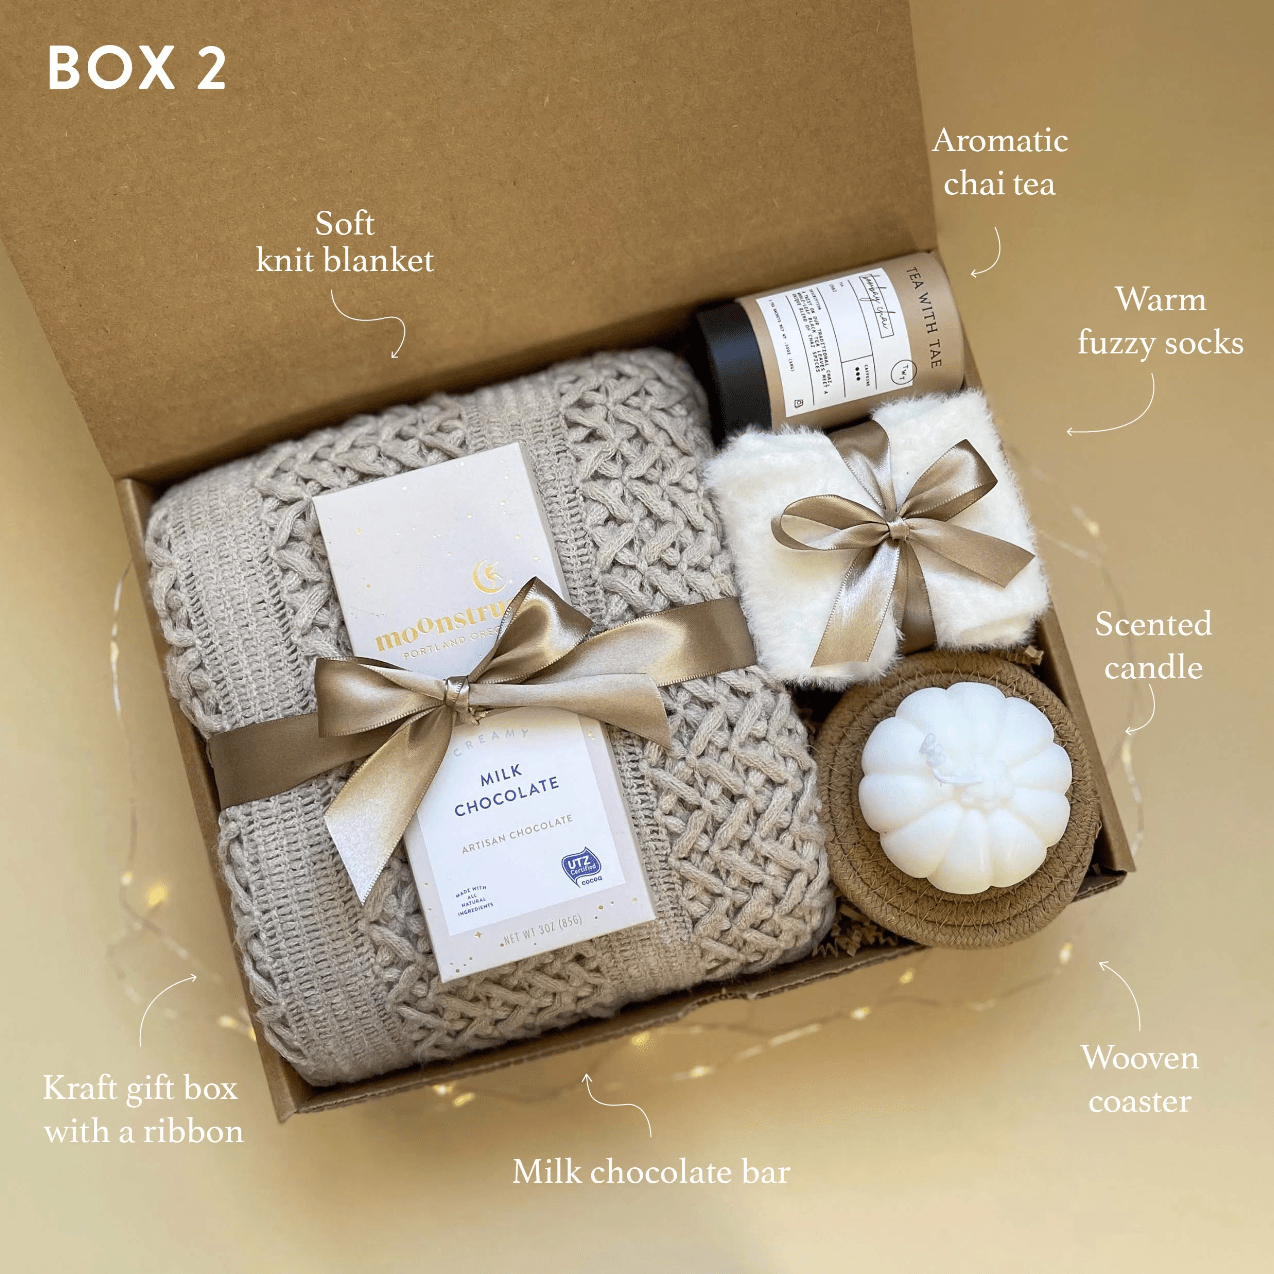 Care Package for Women, Get Well Soon Gifts for Women, Birthday Gifts for  Women, Gift Basket for Women , Self Care Gifts Cheer Up Gifts for Women